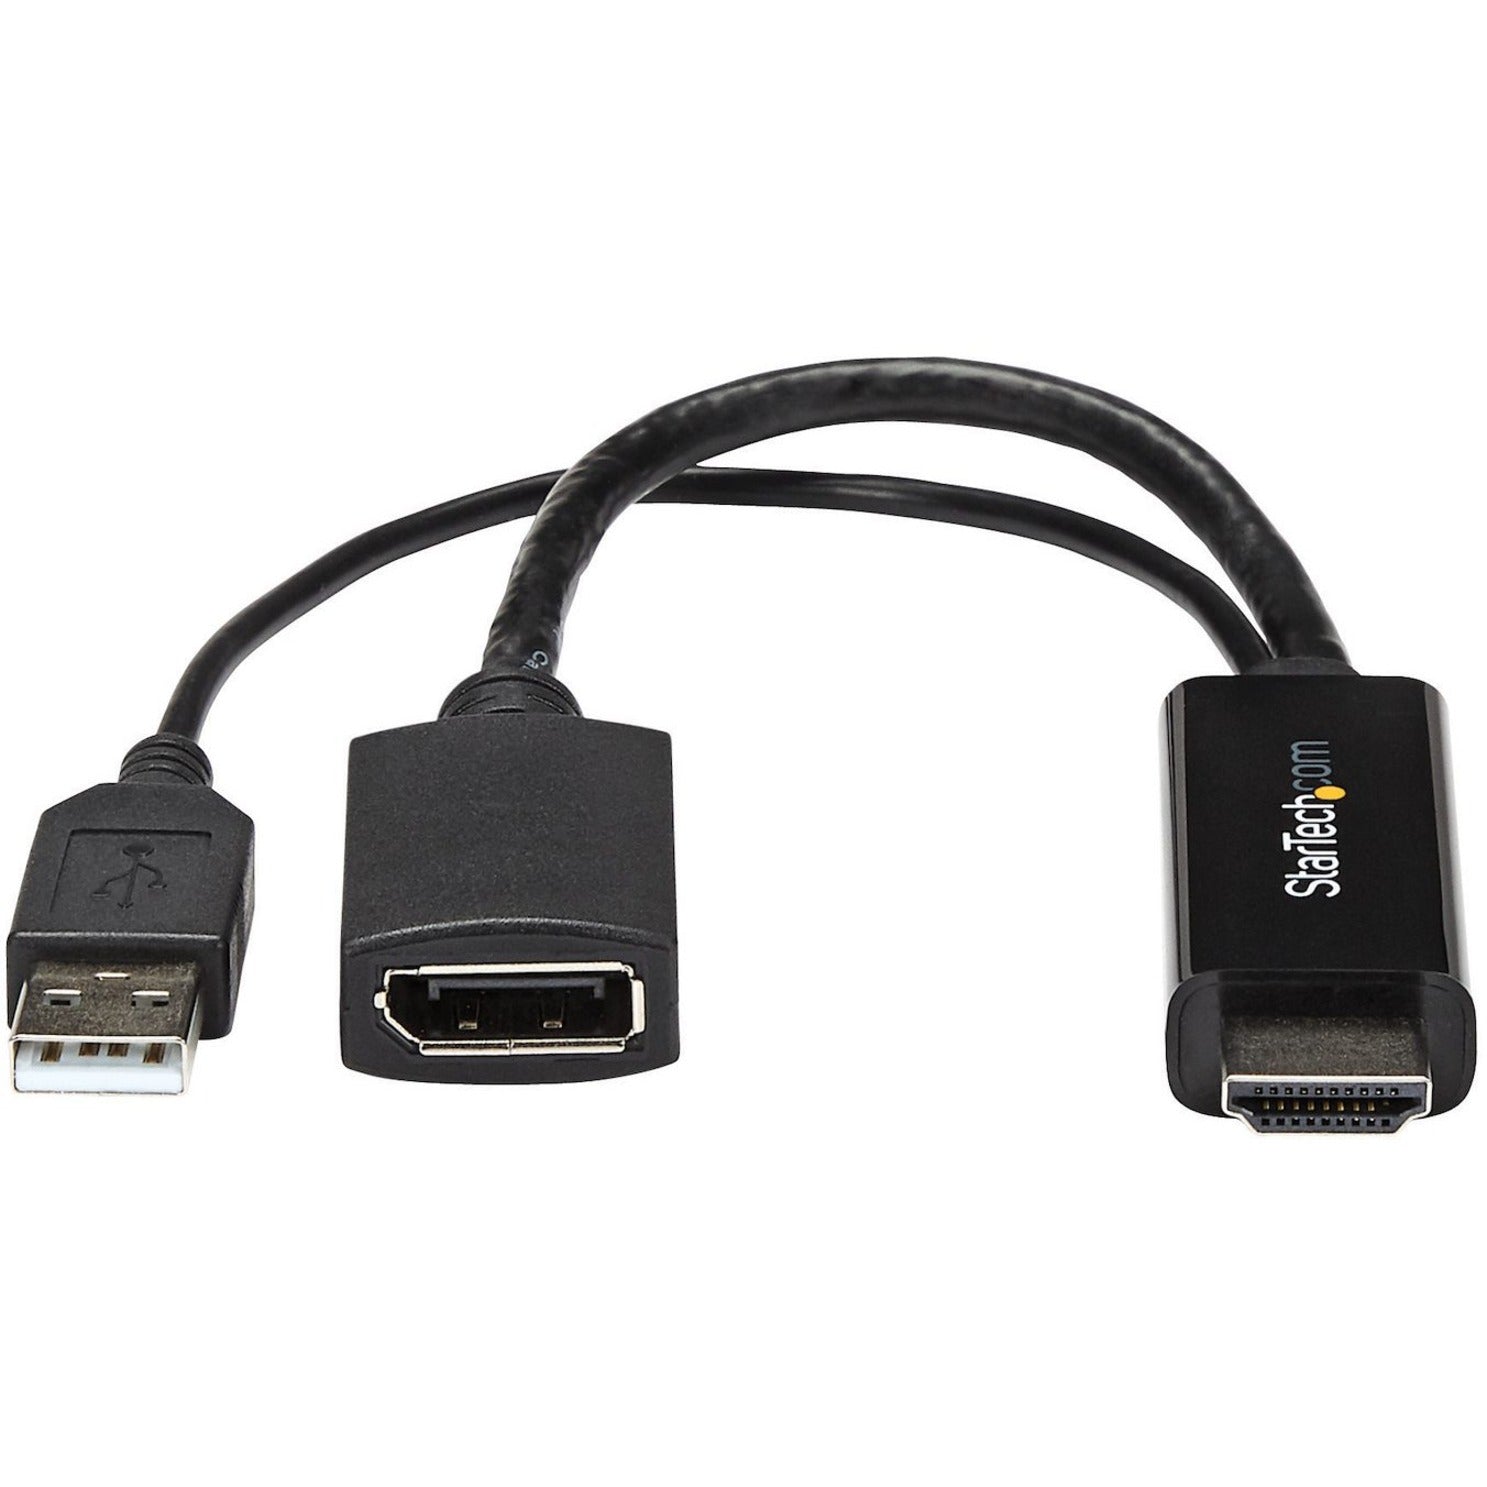 StarTech.com HD2DP HDMI to DisplayPort Converter- HDMI to DP Adapter with USB Power - 4K, Easy Plug-and-Play Video Adapter